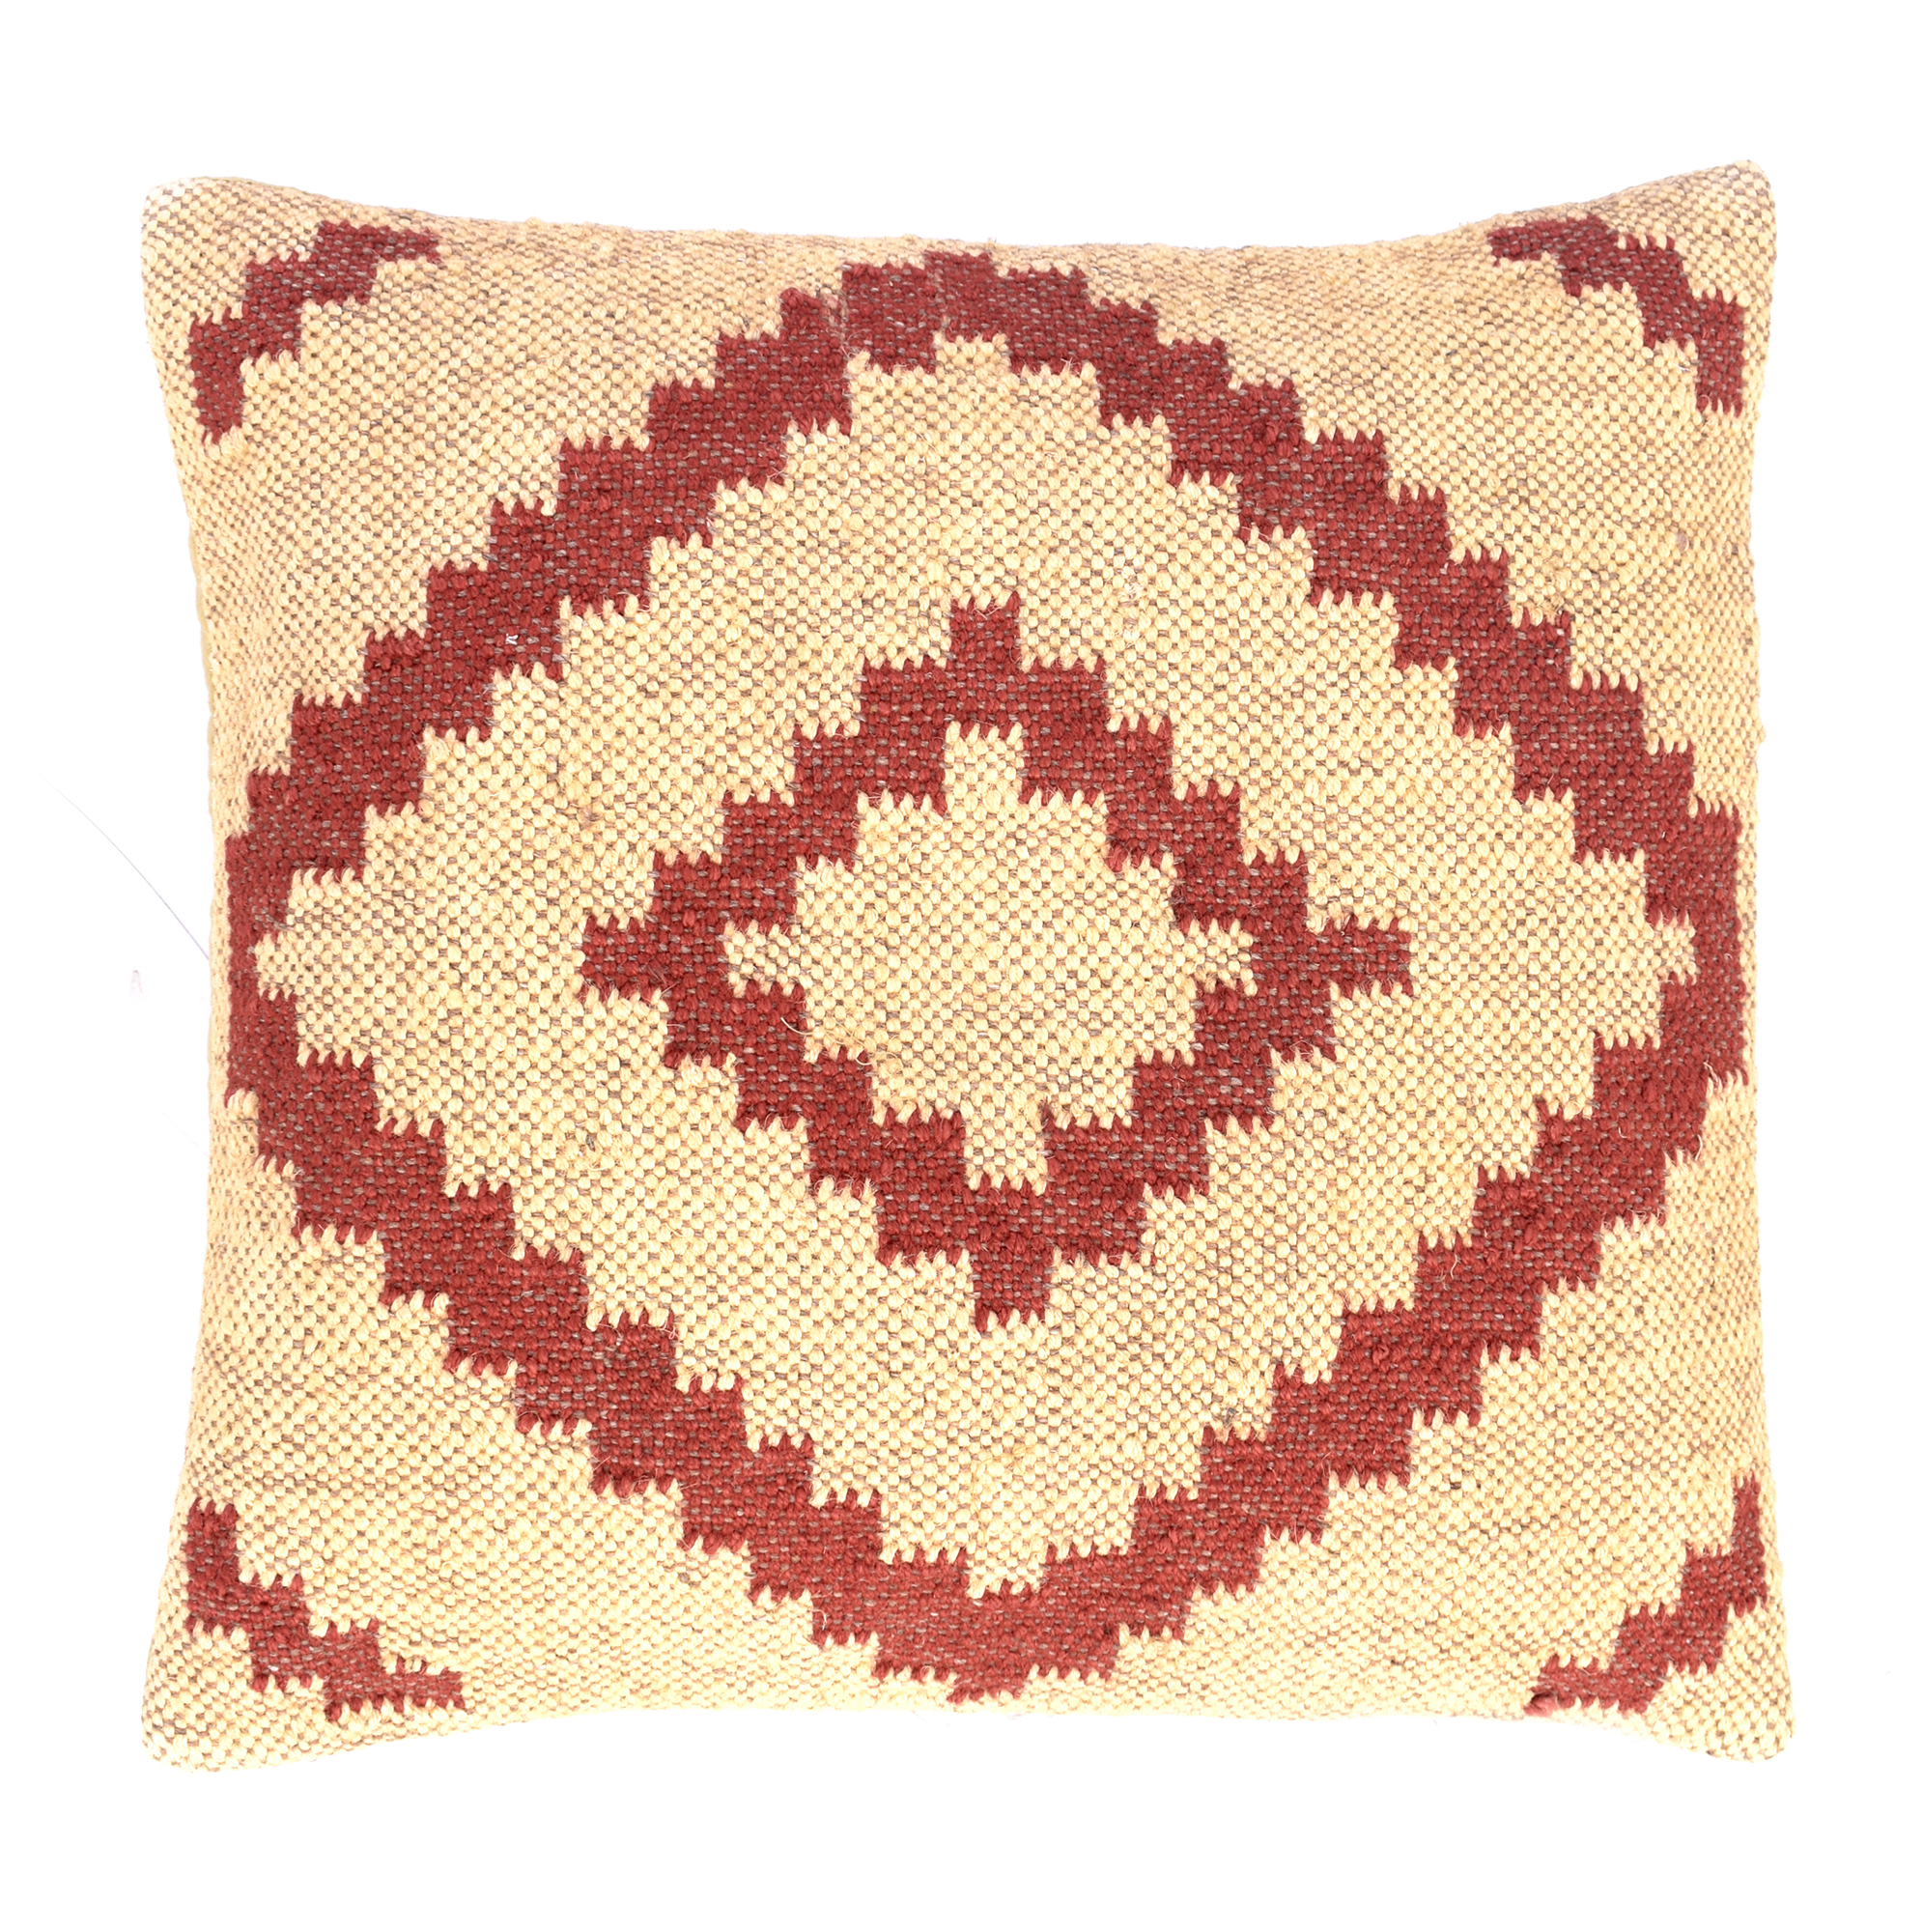 Indian Vintage Kilim Rug Cushion Cover 18x18 Hand Woven Jute Rustic Pillow Case 